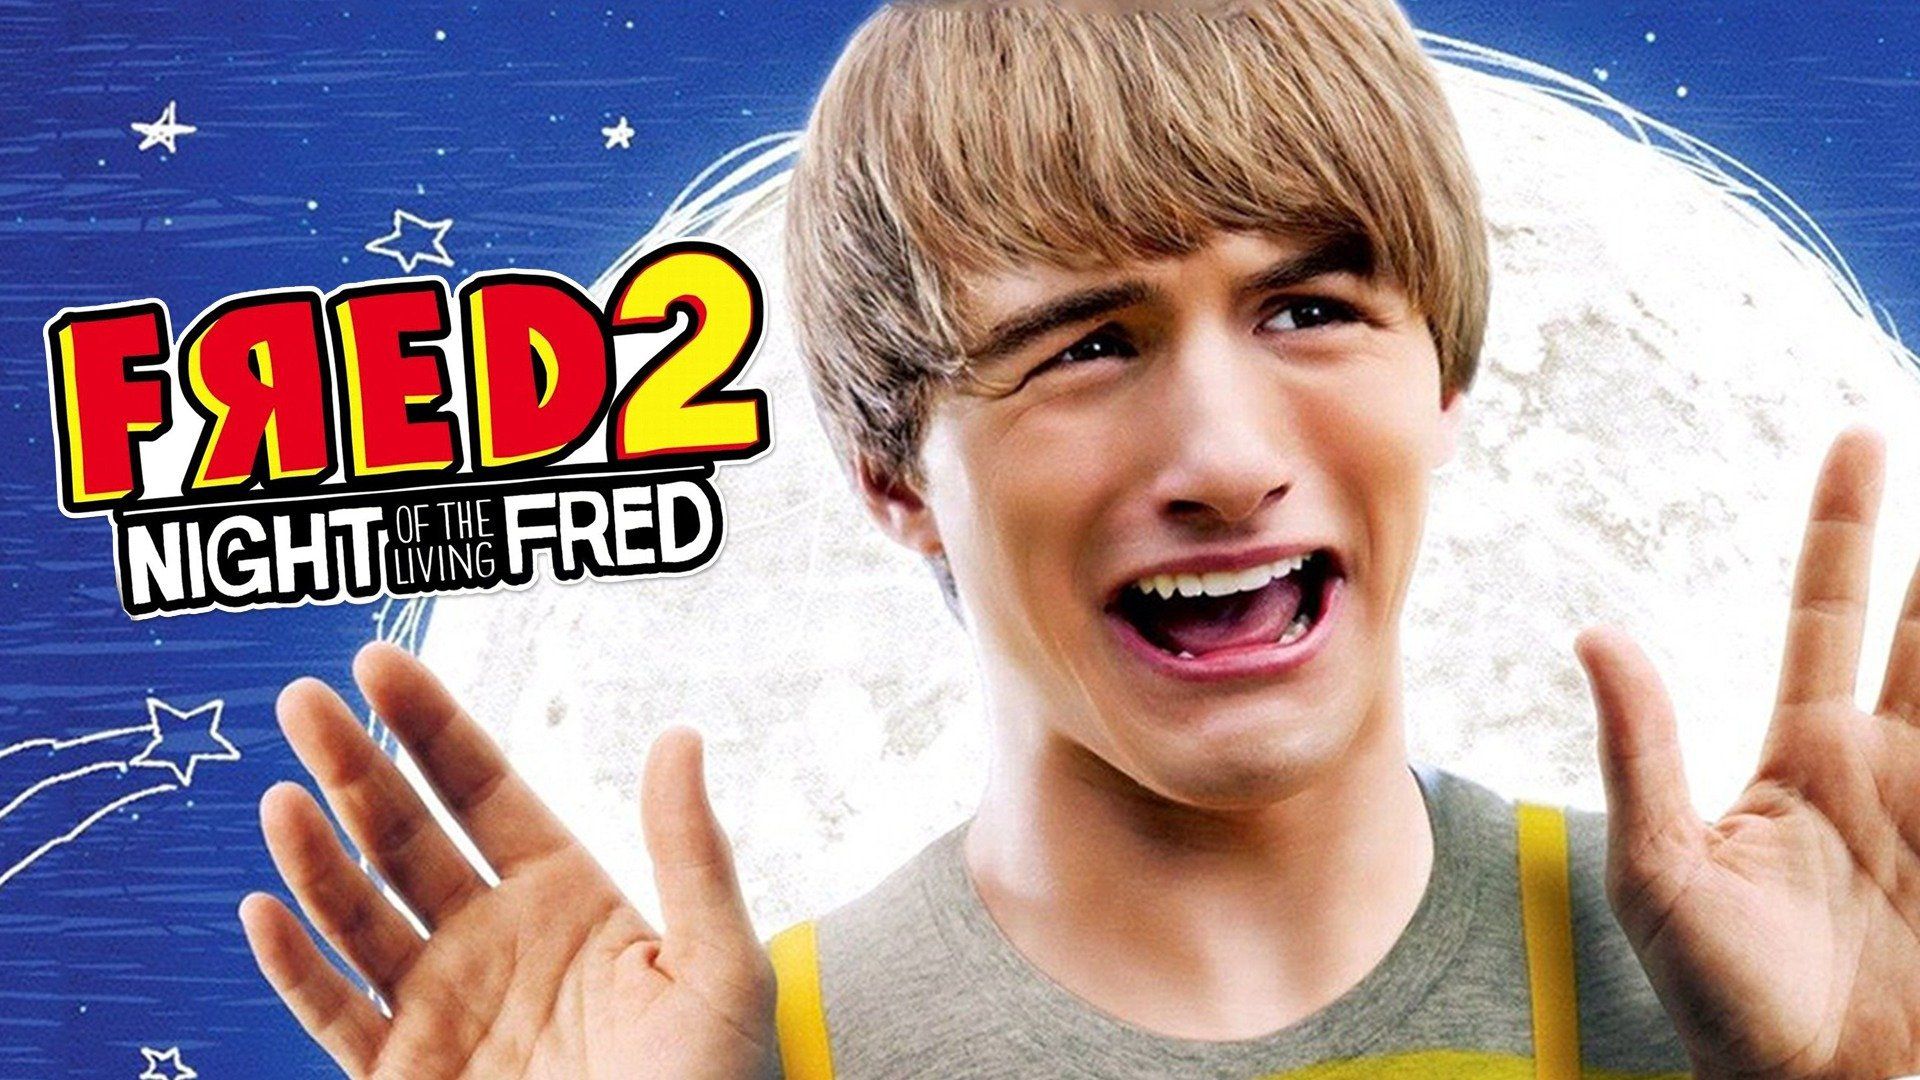 Watch Fred 2: Night of the Living Fred (2011) Full Movie Free Online - Plex